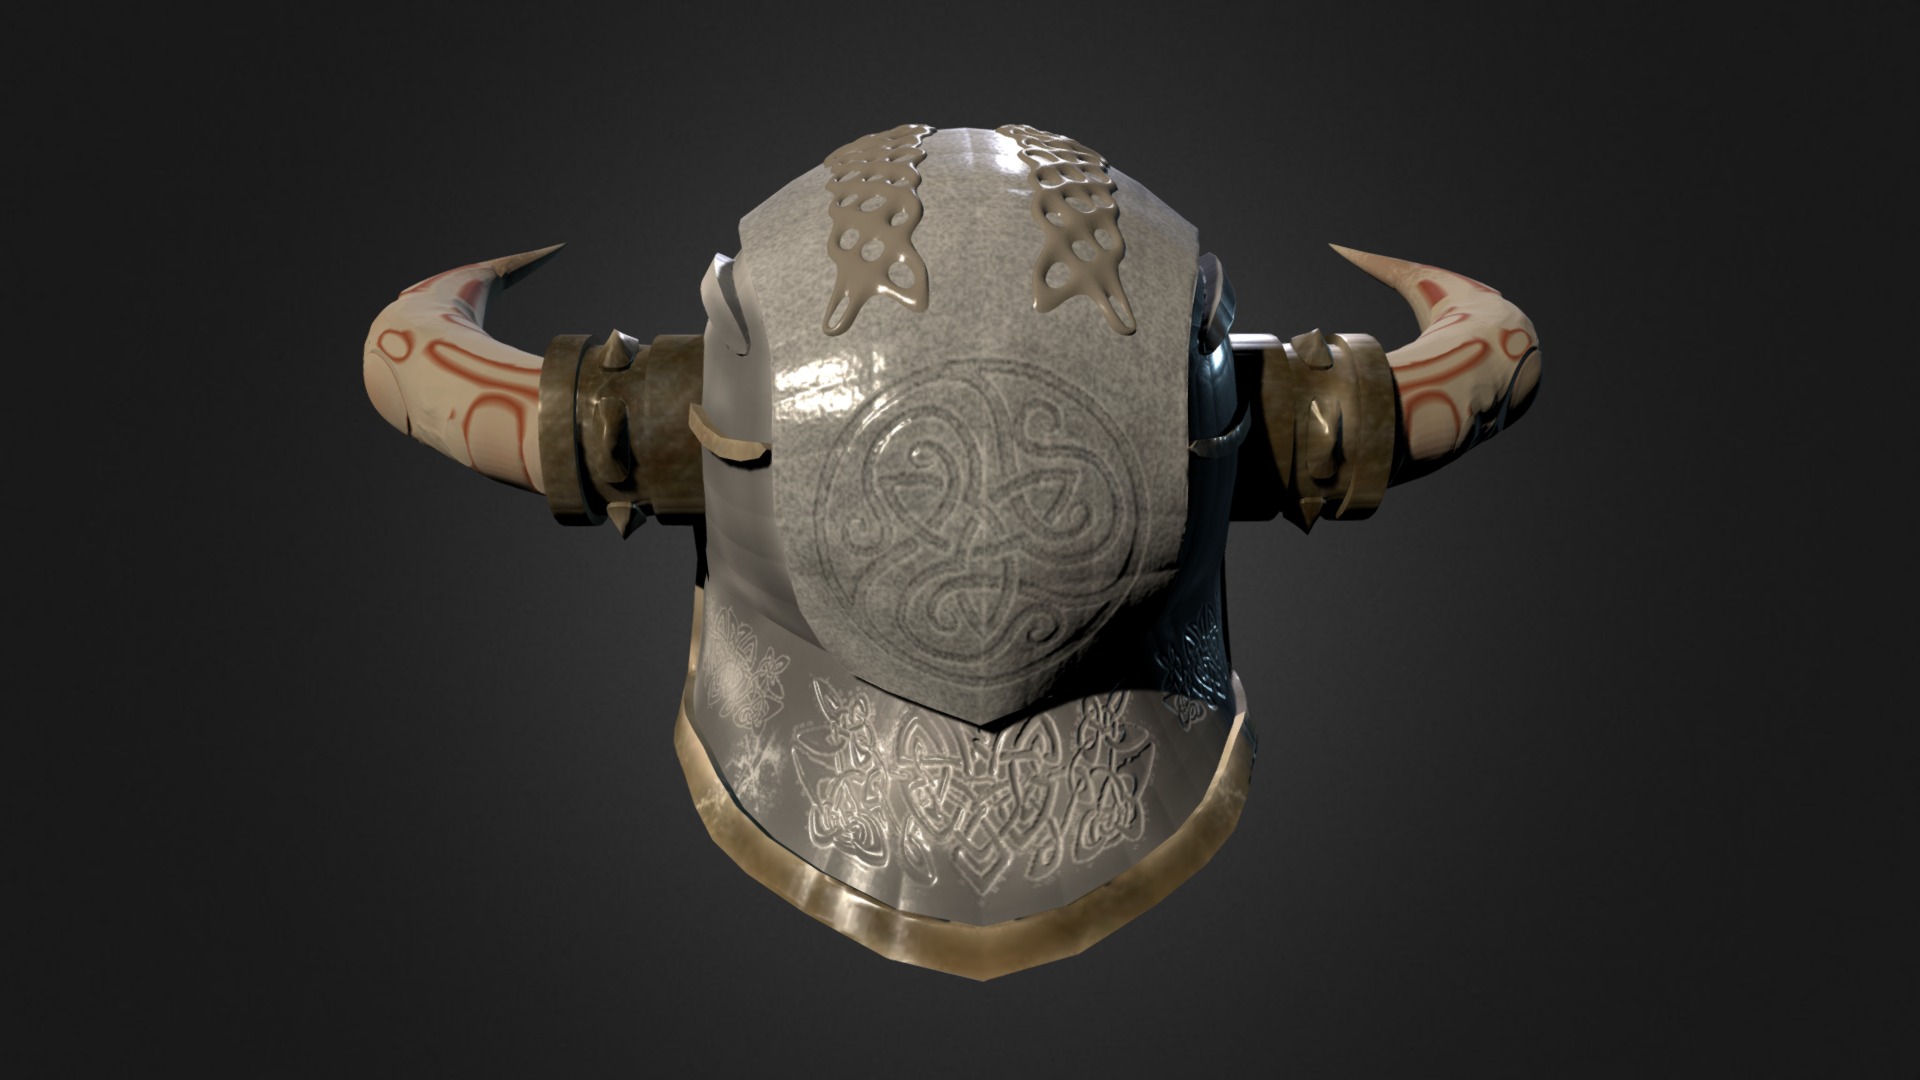 WiP of a gladiator helm I am doing 3d model